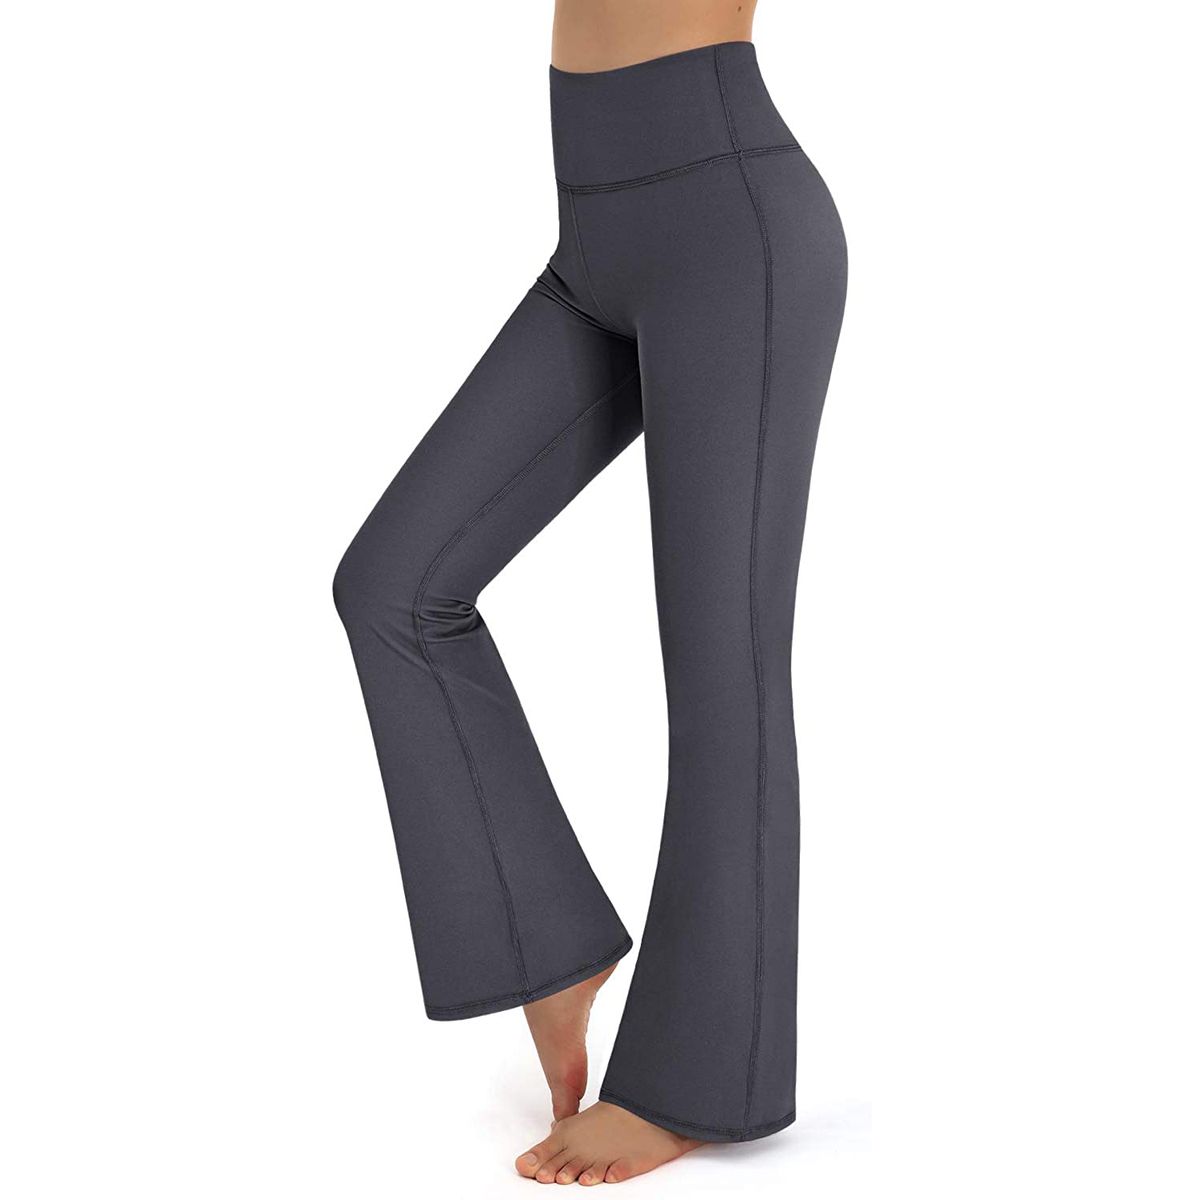 These Comfortable Bootcut Yoga Pants Start at $14 on Amazon | InStyle